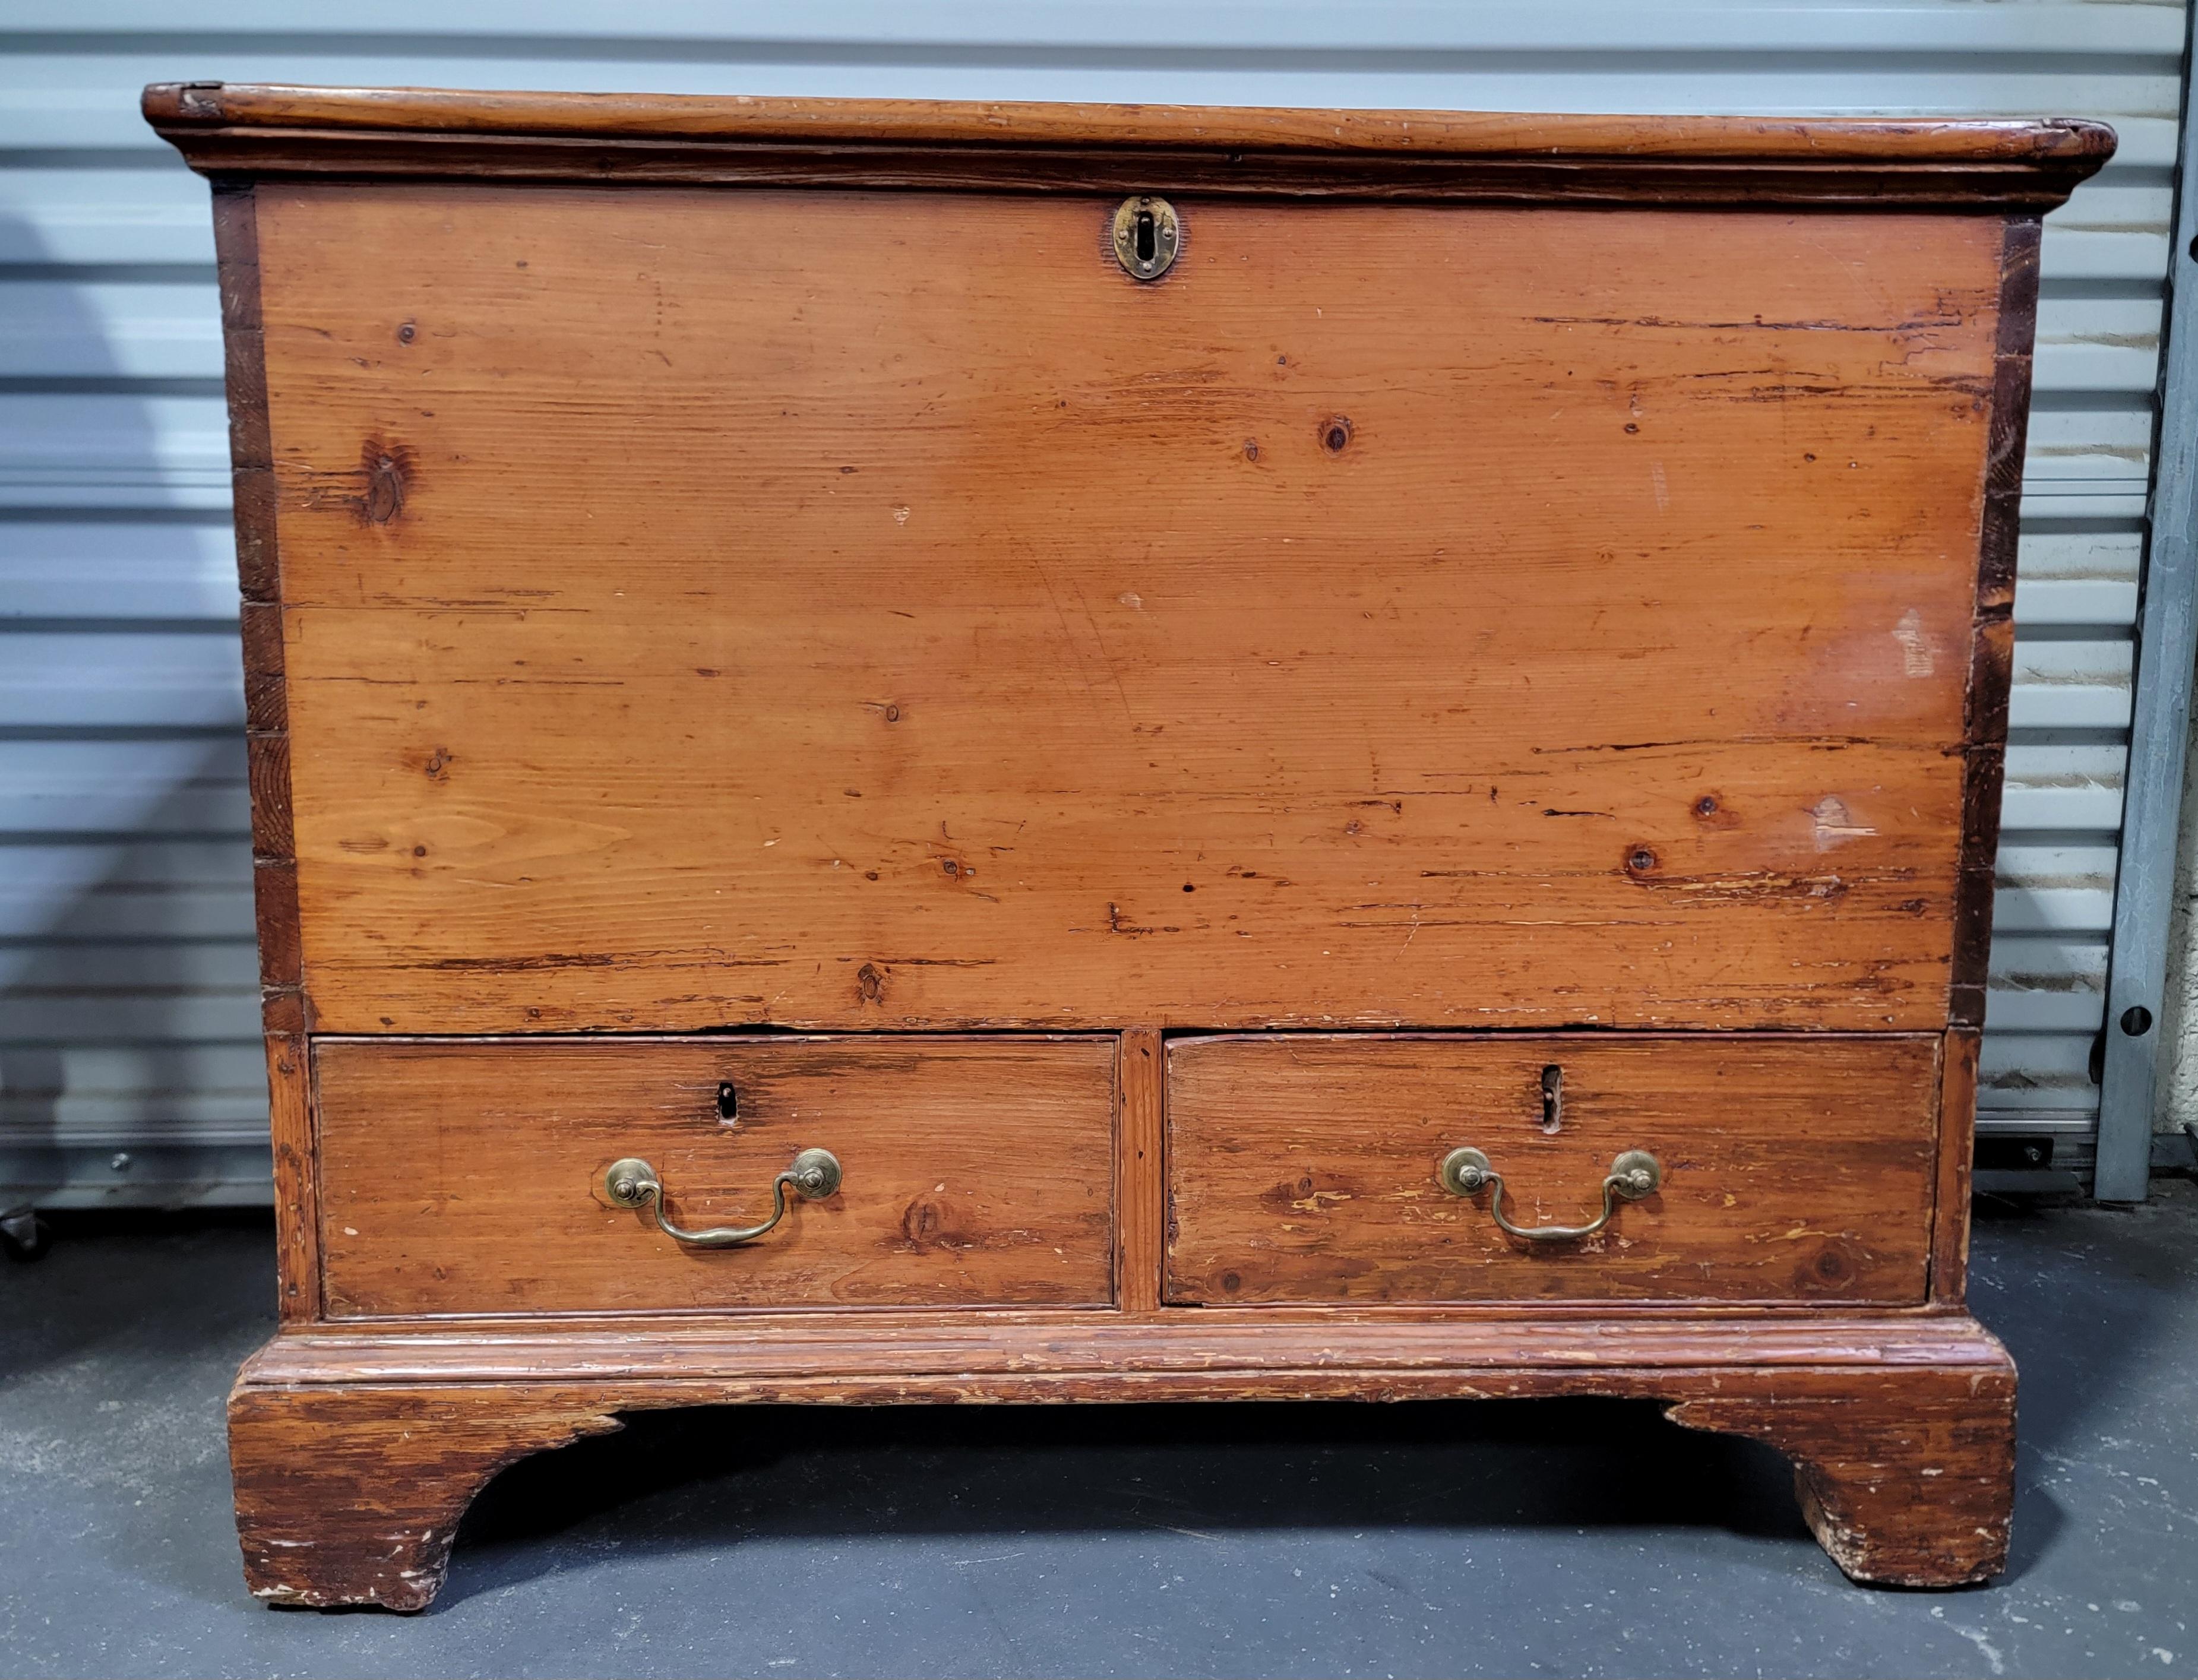 Iron Early American Pine Blanket Chest / Trunk For Sale